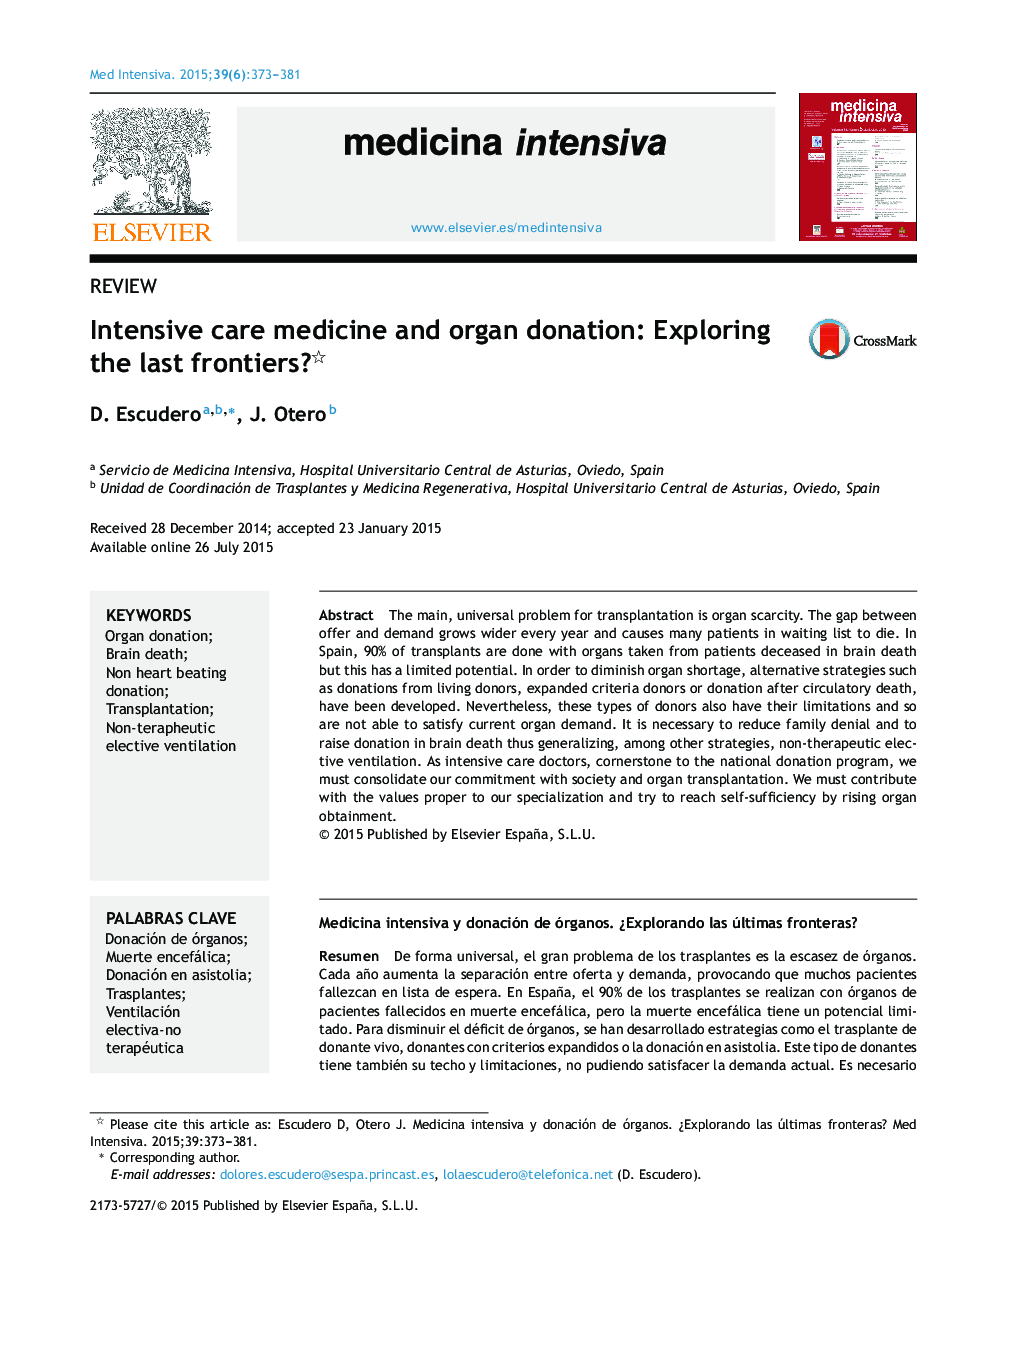 Intensive care medicine and organ donation: Exploring the last frontiers? 